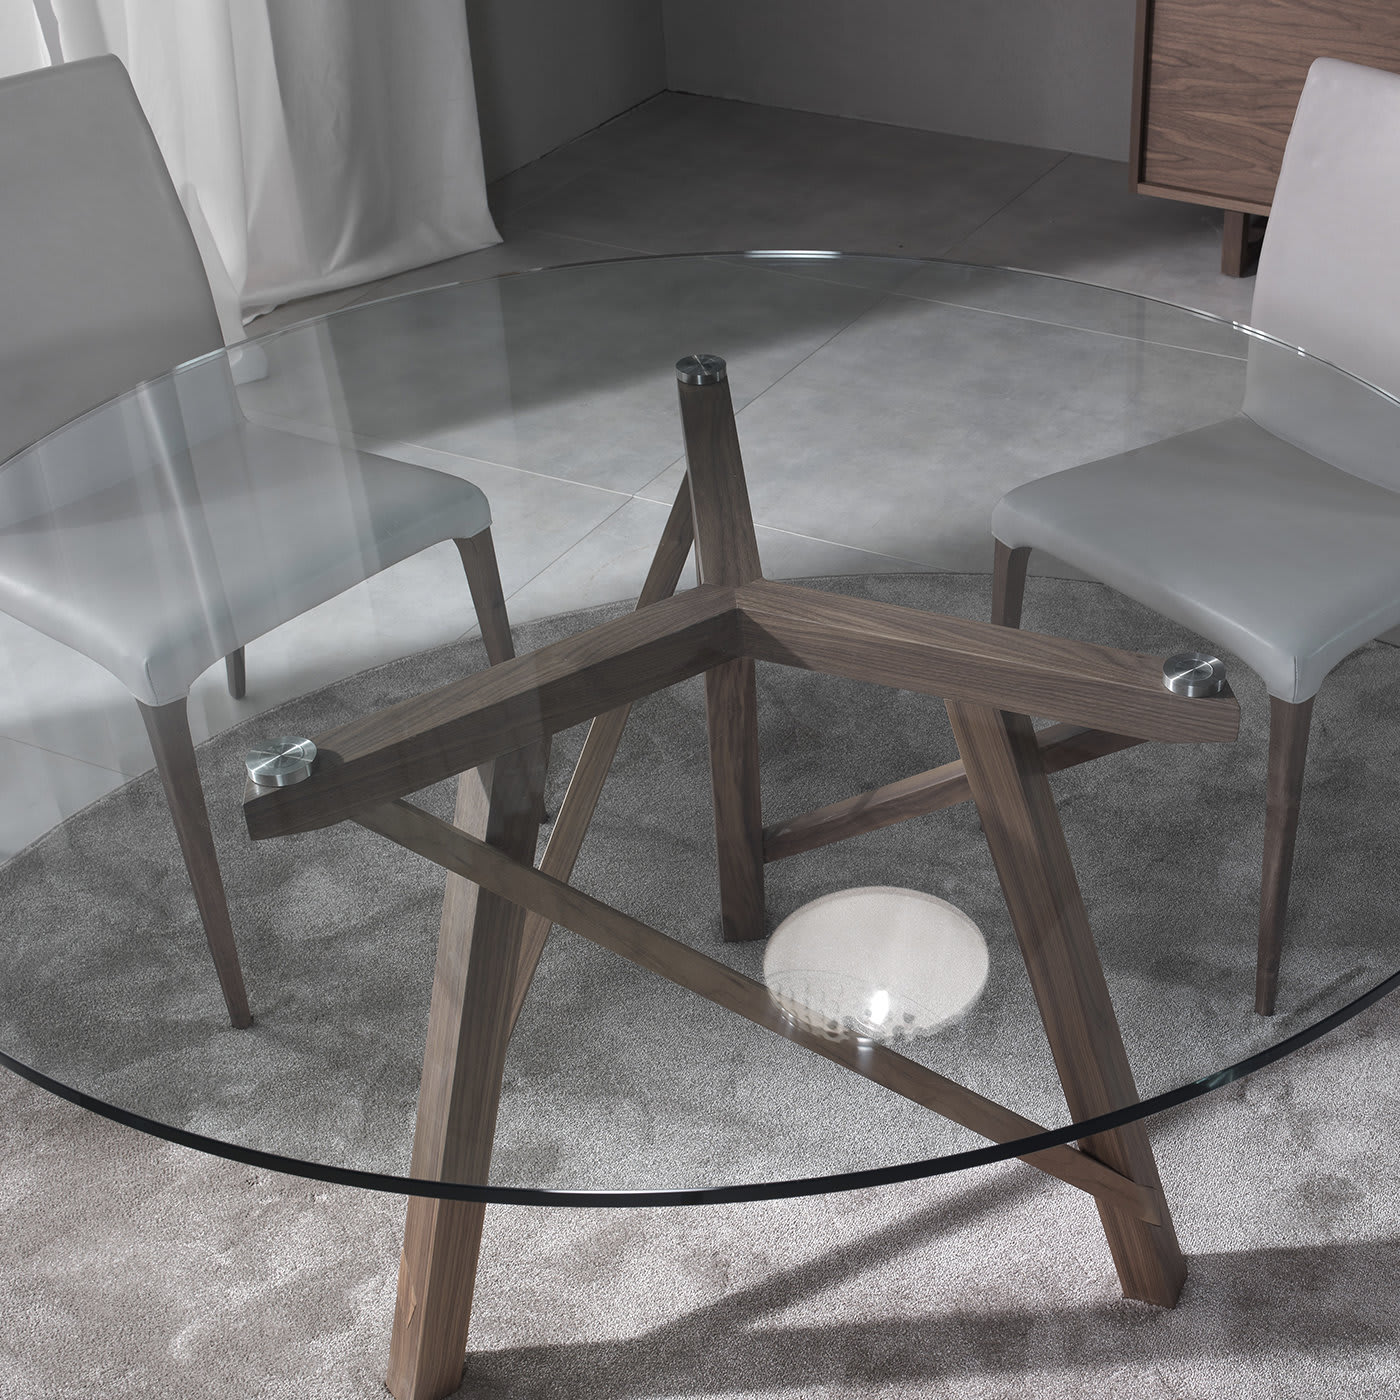 Zeus Round Table by Giuliano and Gabriele Cappelletti - Pacini & Cappellini